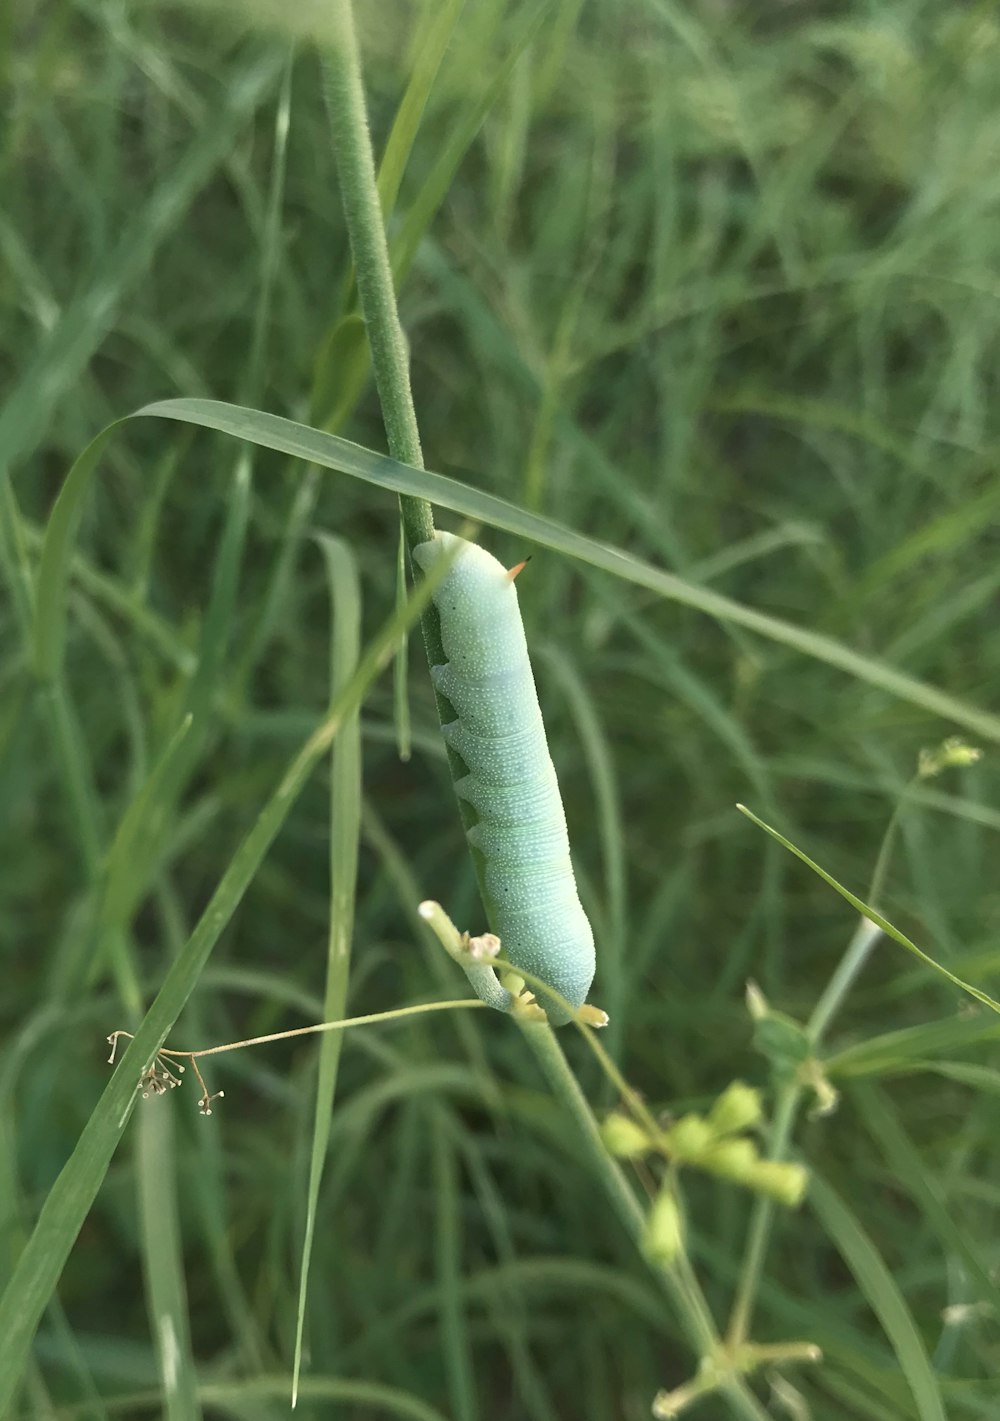 green grasshopper perched on green grass in close up photography during daytime